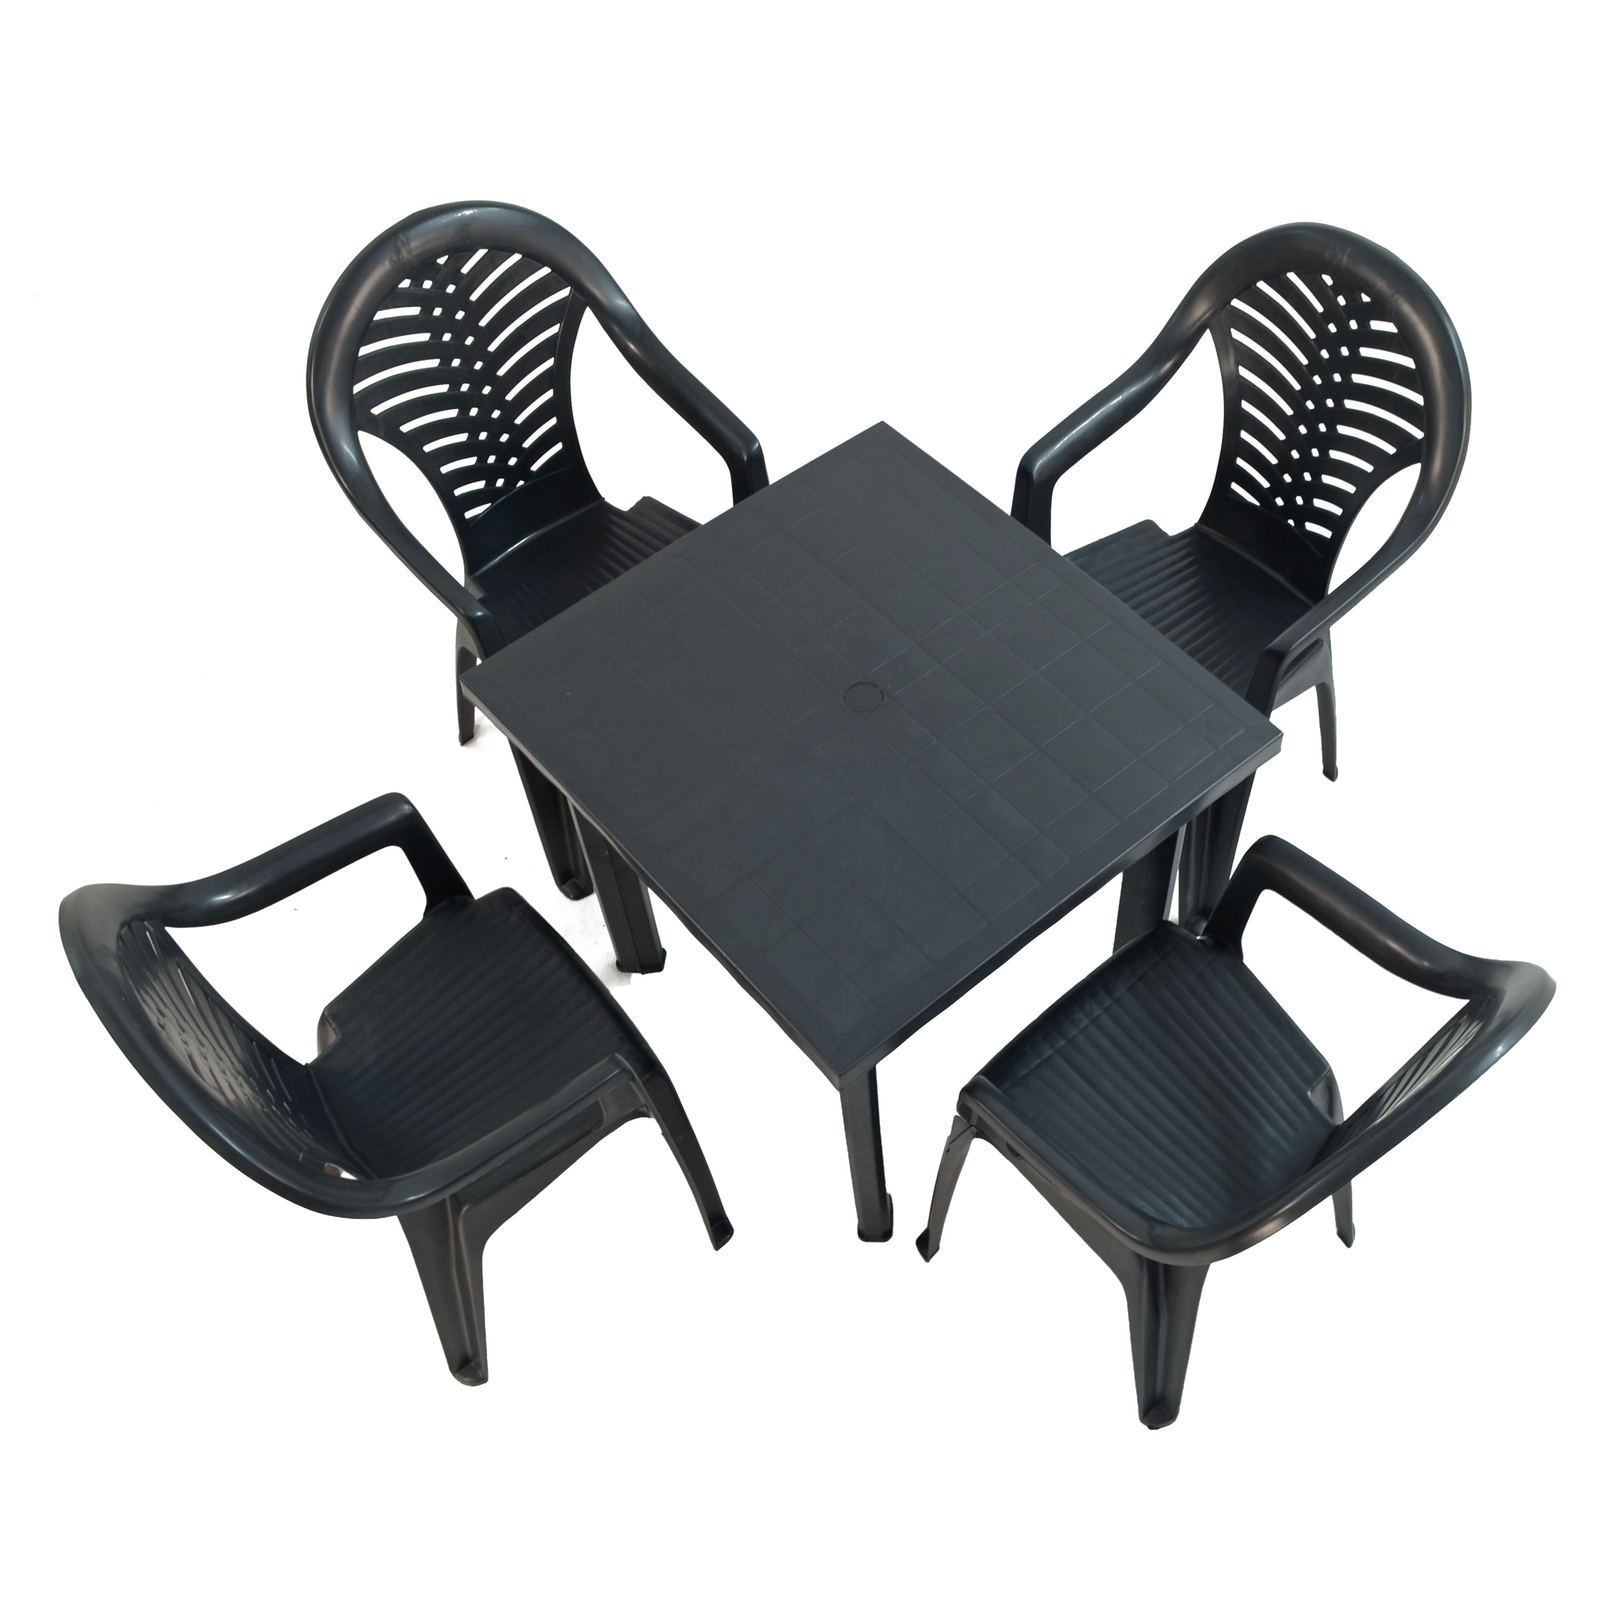 Trabella Rapino Square Table With 4 Pineto Chairs Set Anthracite Grey Dining Sets Trabella Default Title  